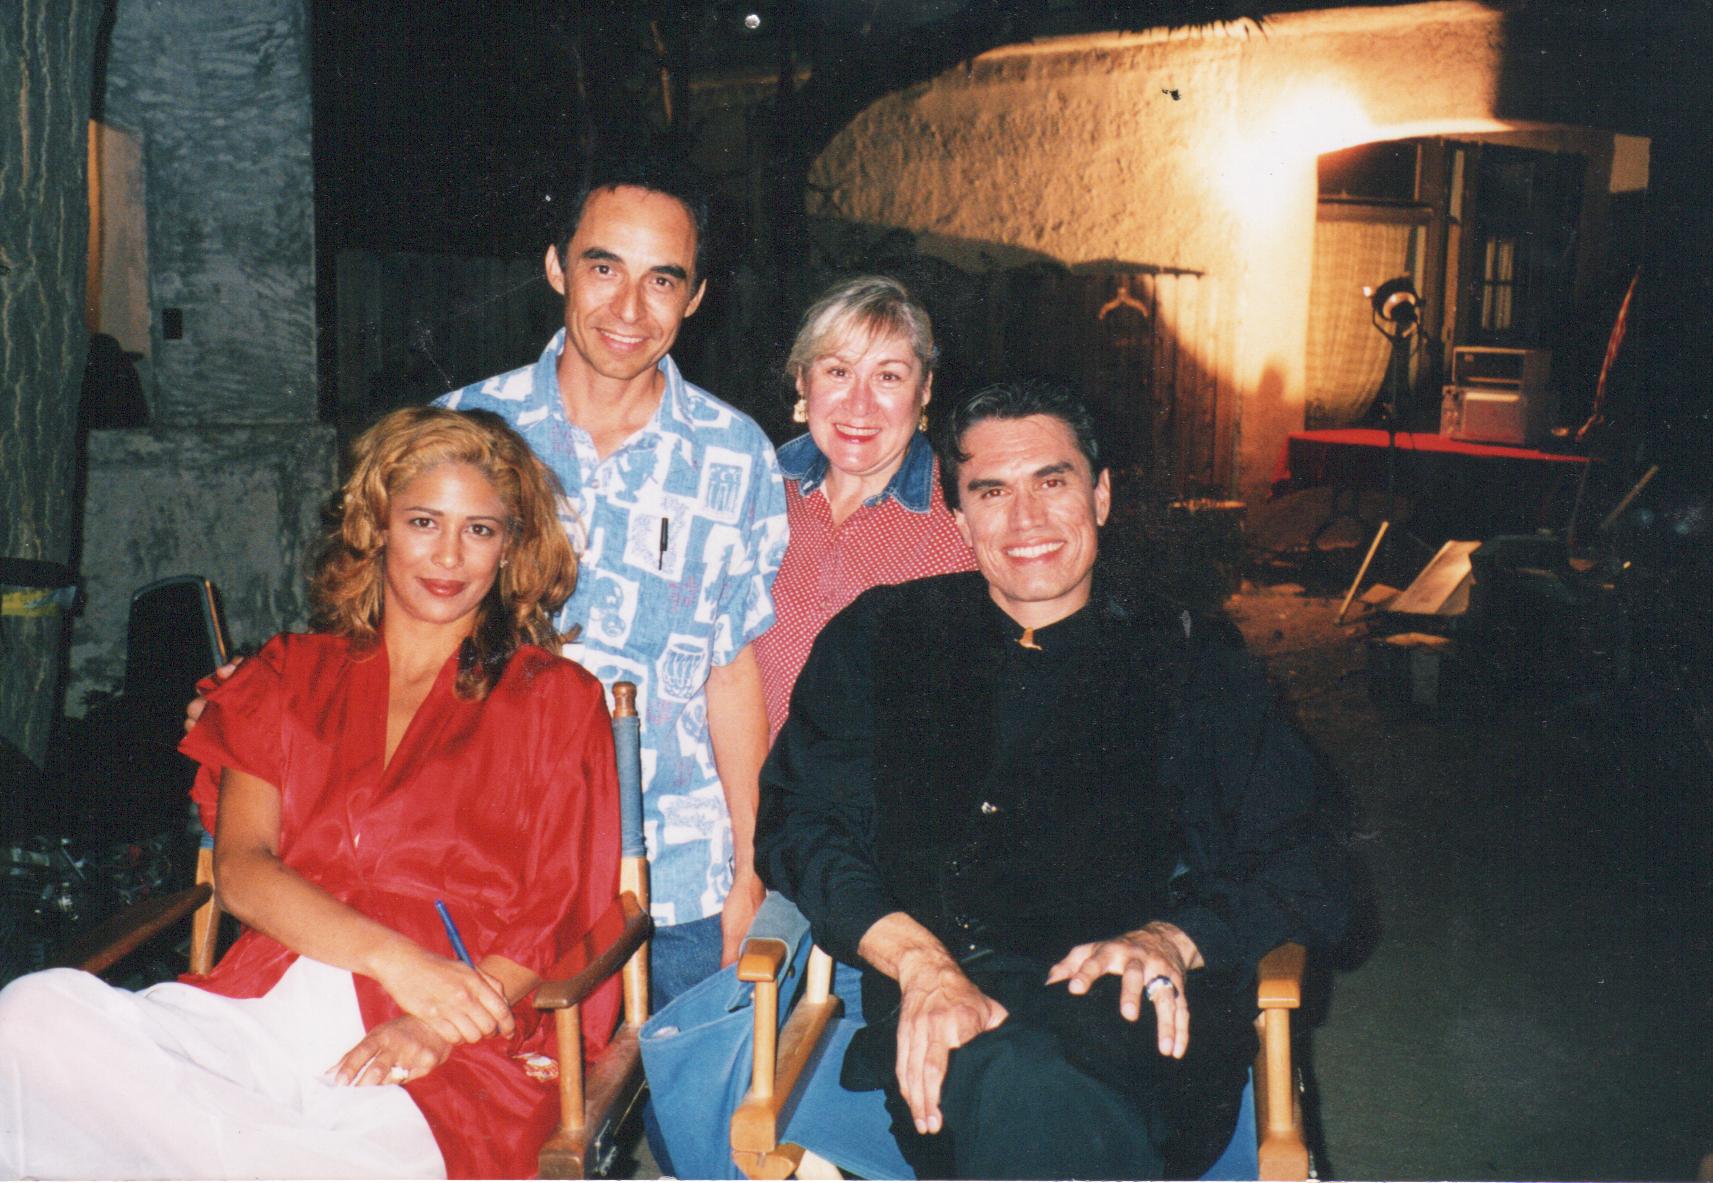 On set of BLACK DAWN with stars Catherine Lazo and Marco Rodriguez sitting and Rudy Quintanilla and Alice Flores standing.